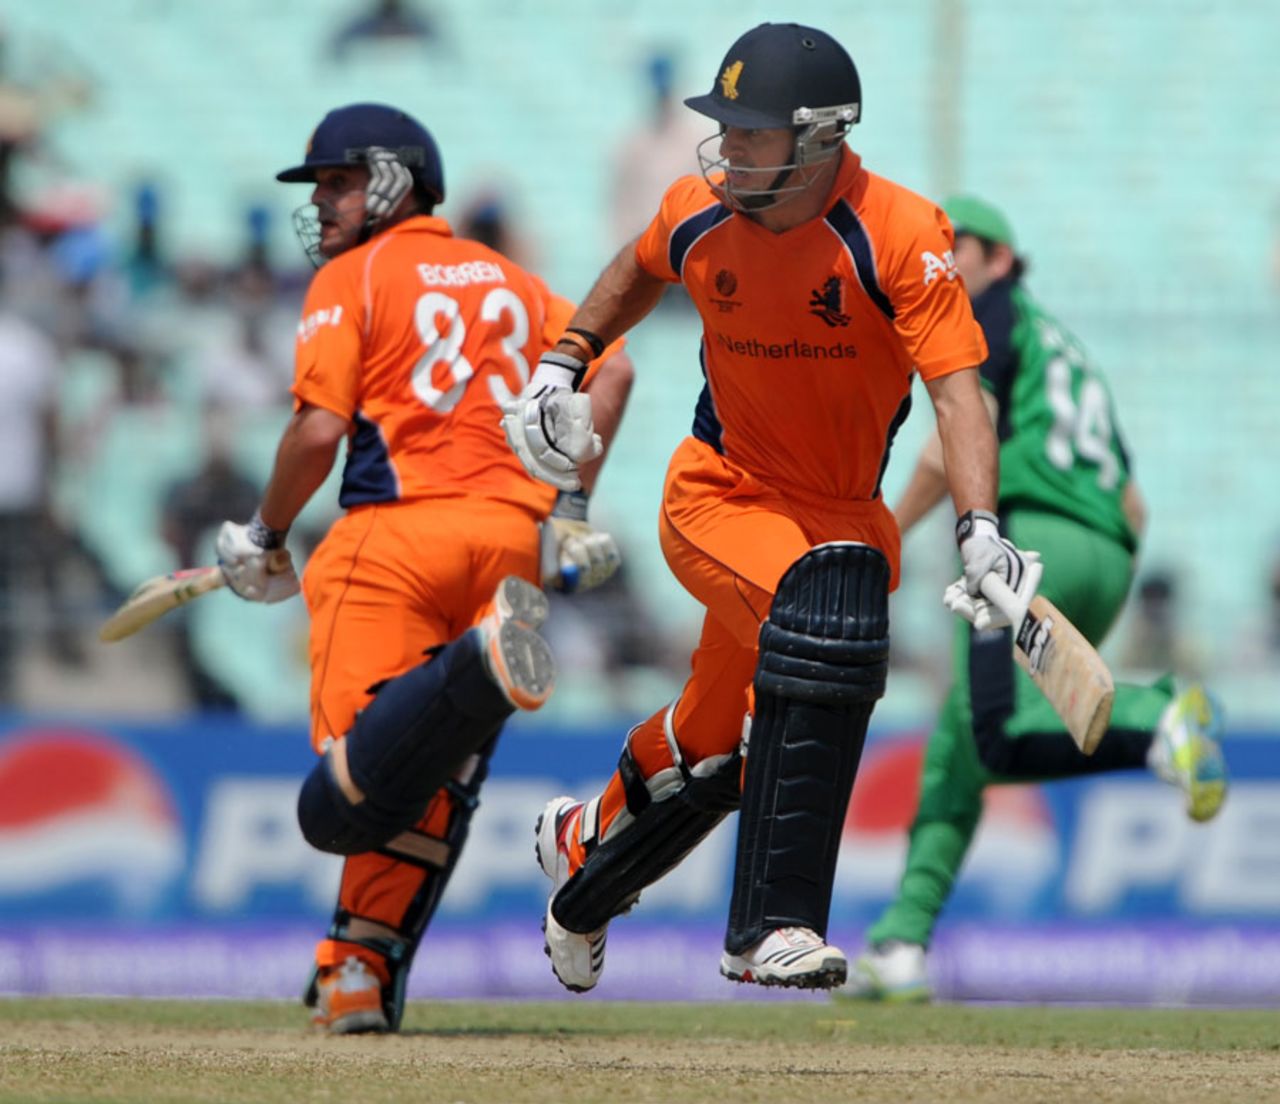 Peter Borren and Ryan ten Doeschate take a run during their century partnership, Ireland v Netherlands, World Cup 2011, Group B, March 18, 2011